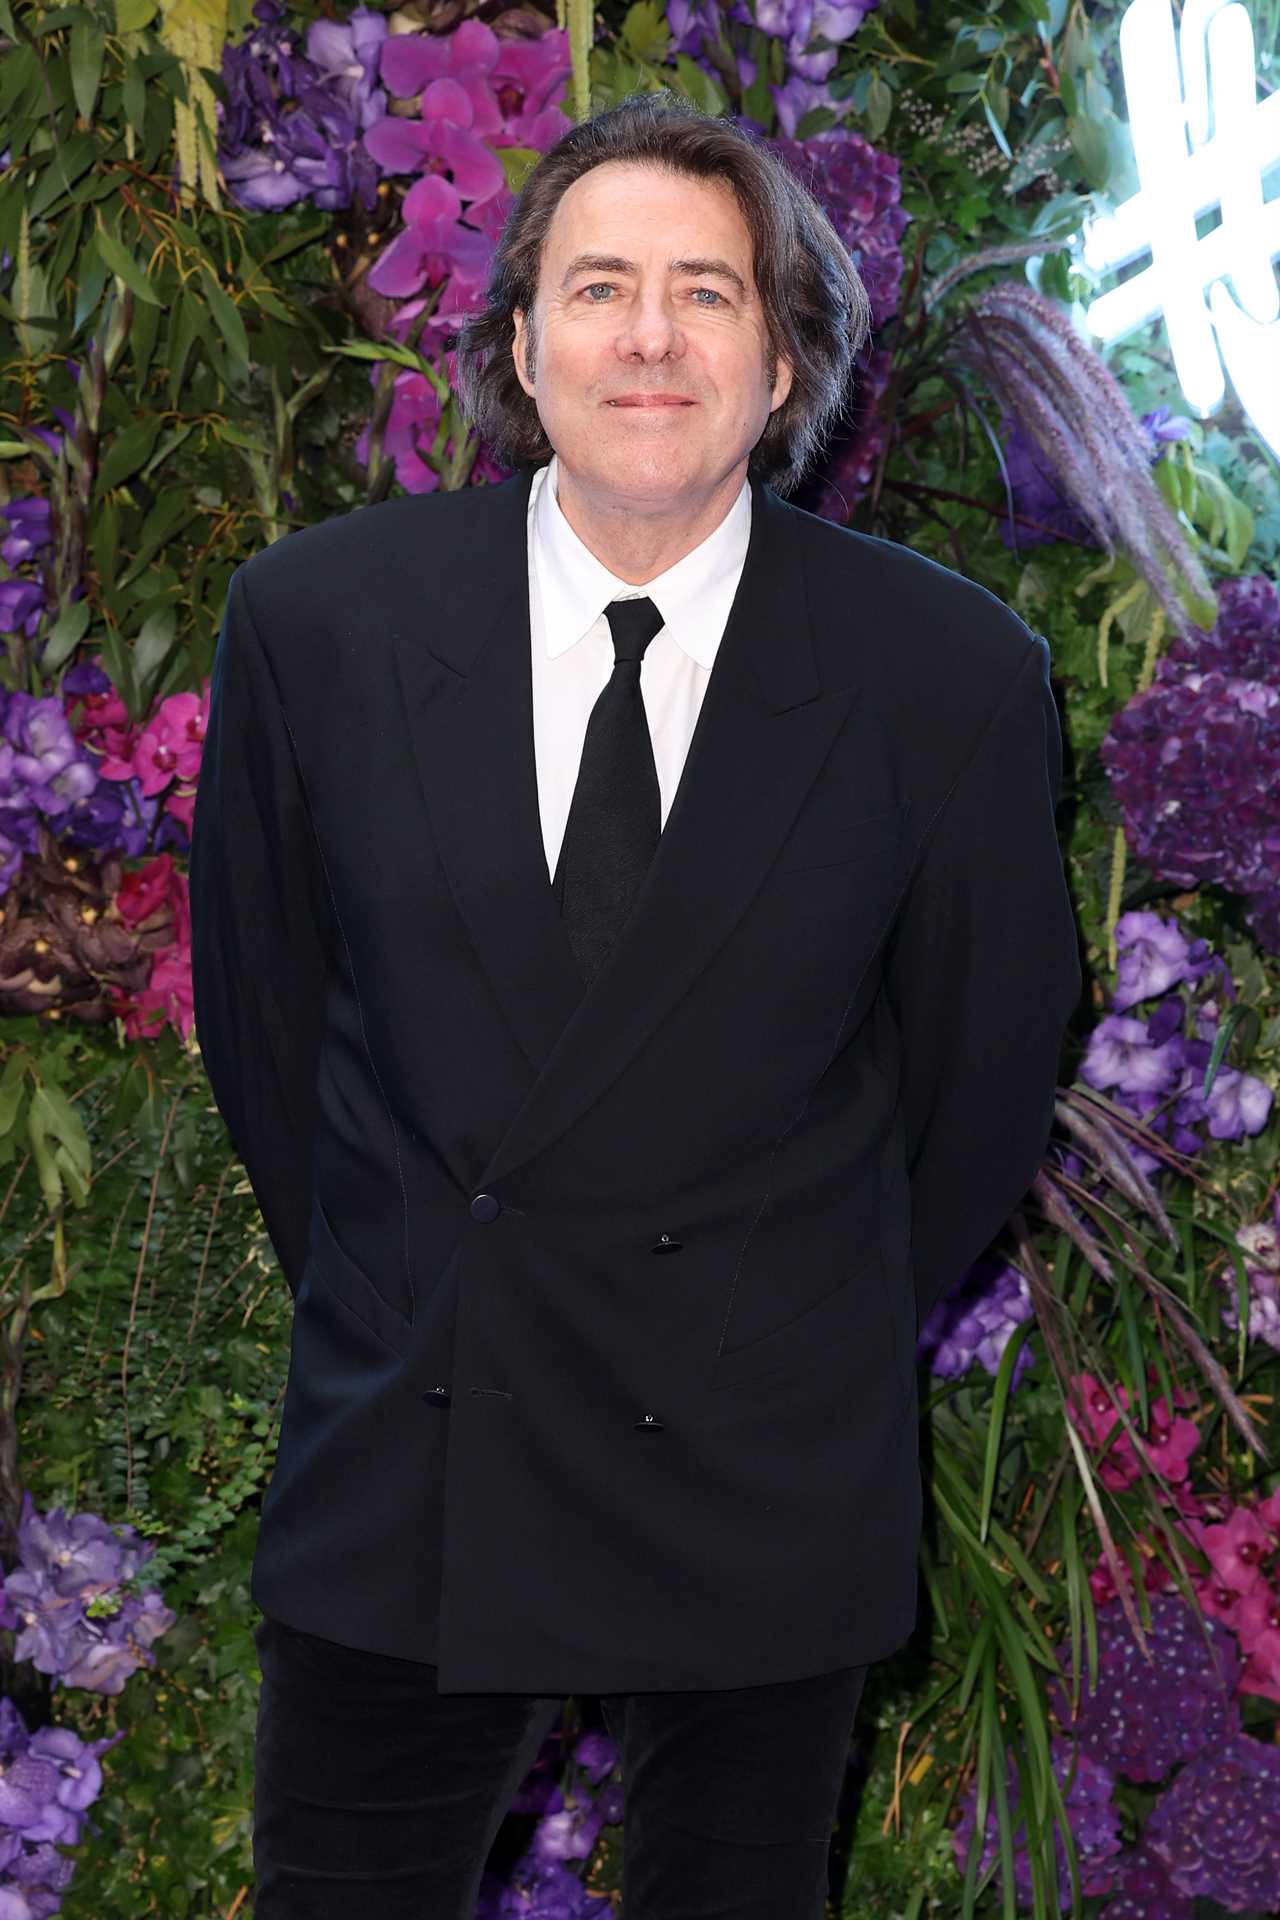 Jonathan Ross faces backlash for divisive Oscars coverage on ITV